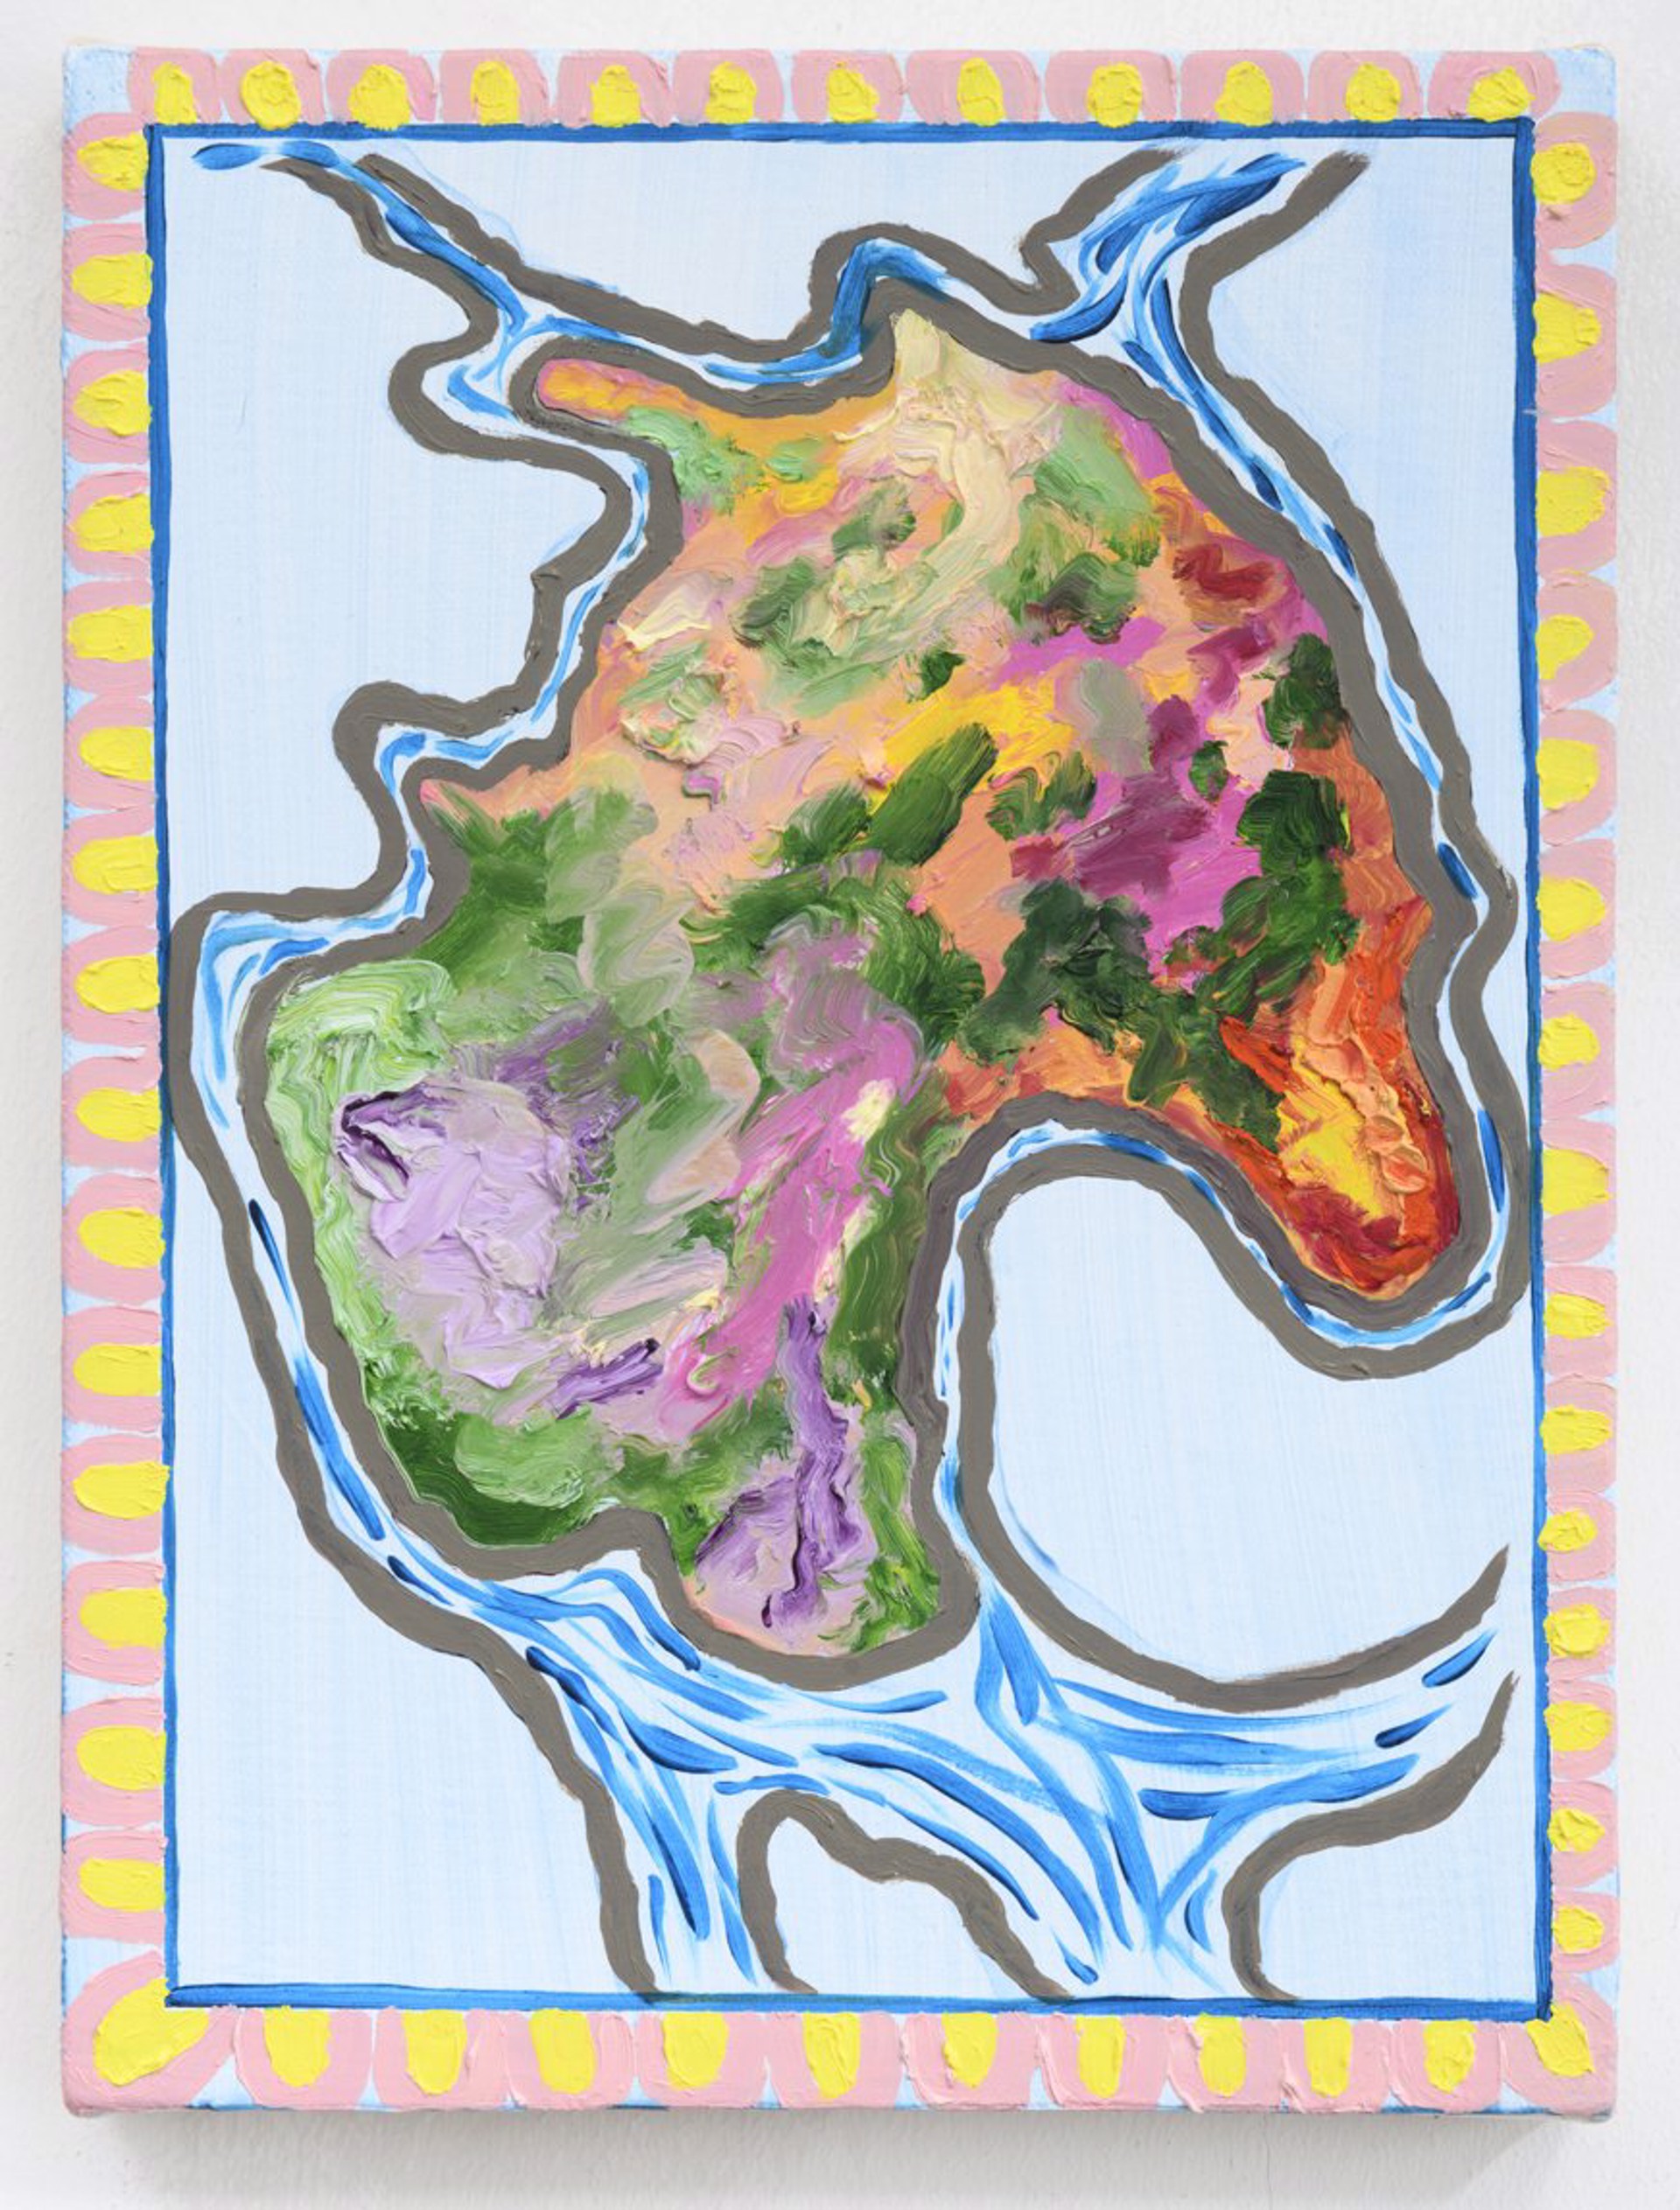 Wales Spring Map by Susan Lizotte